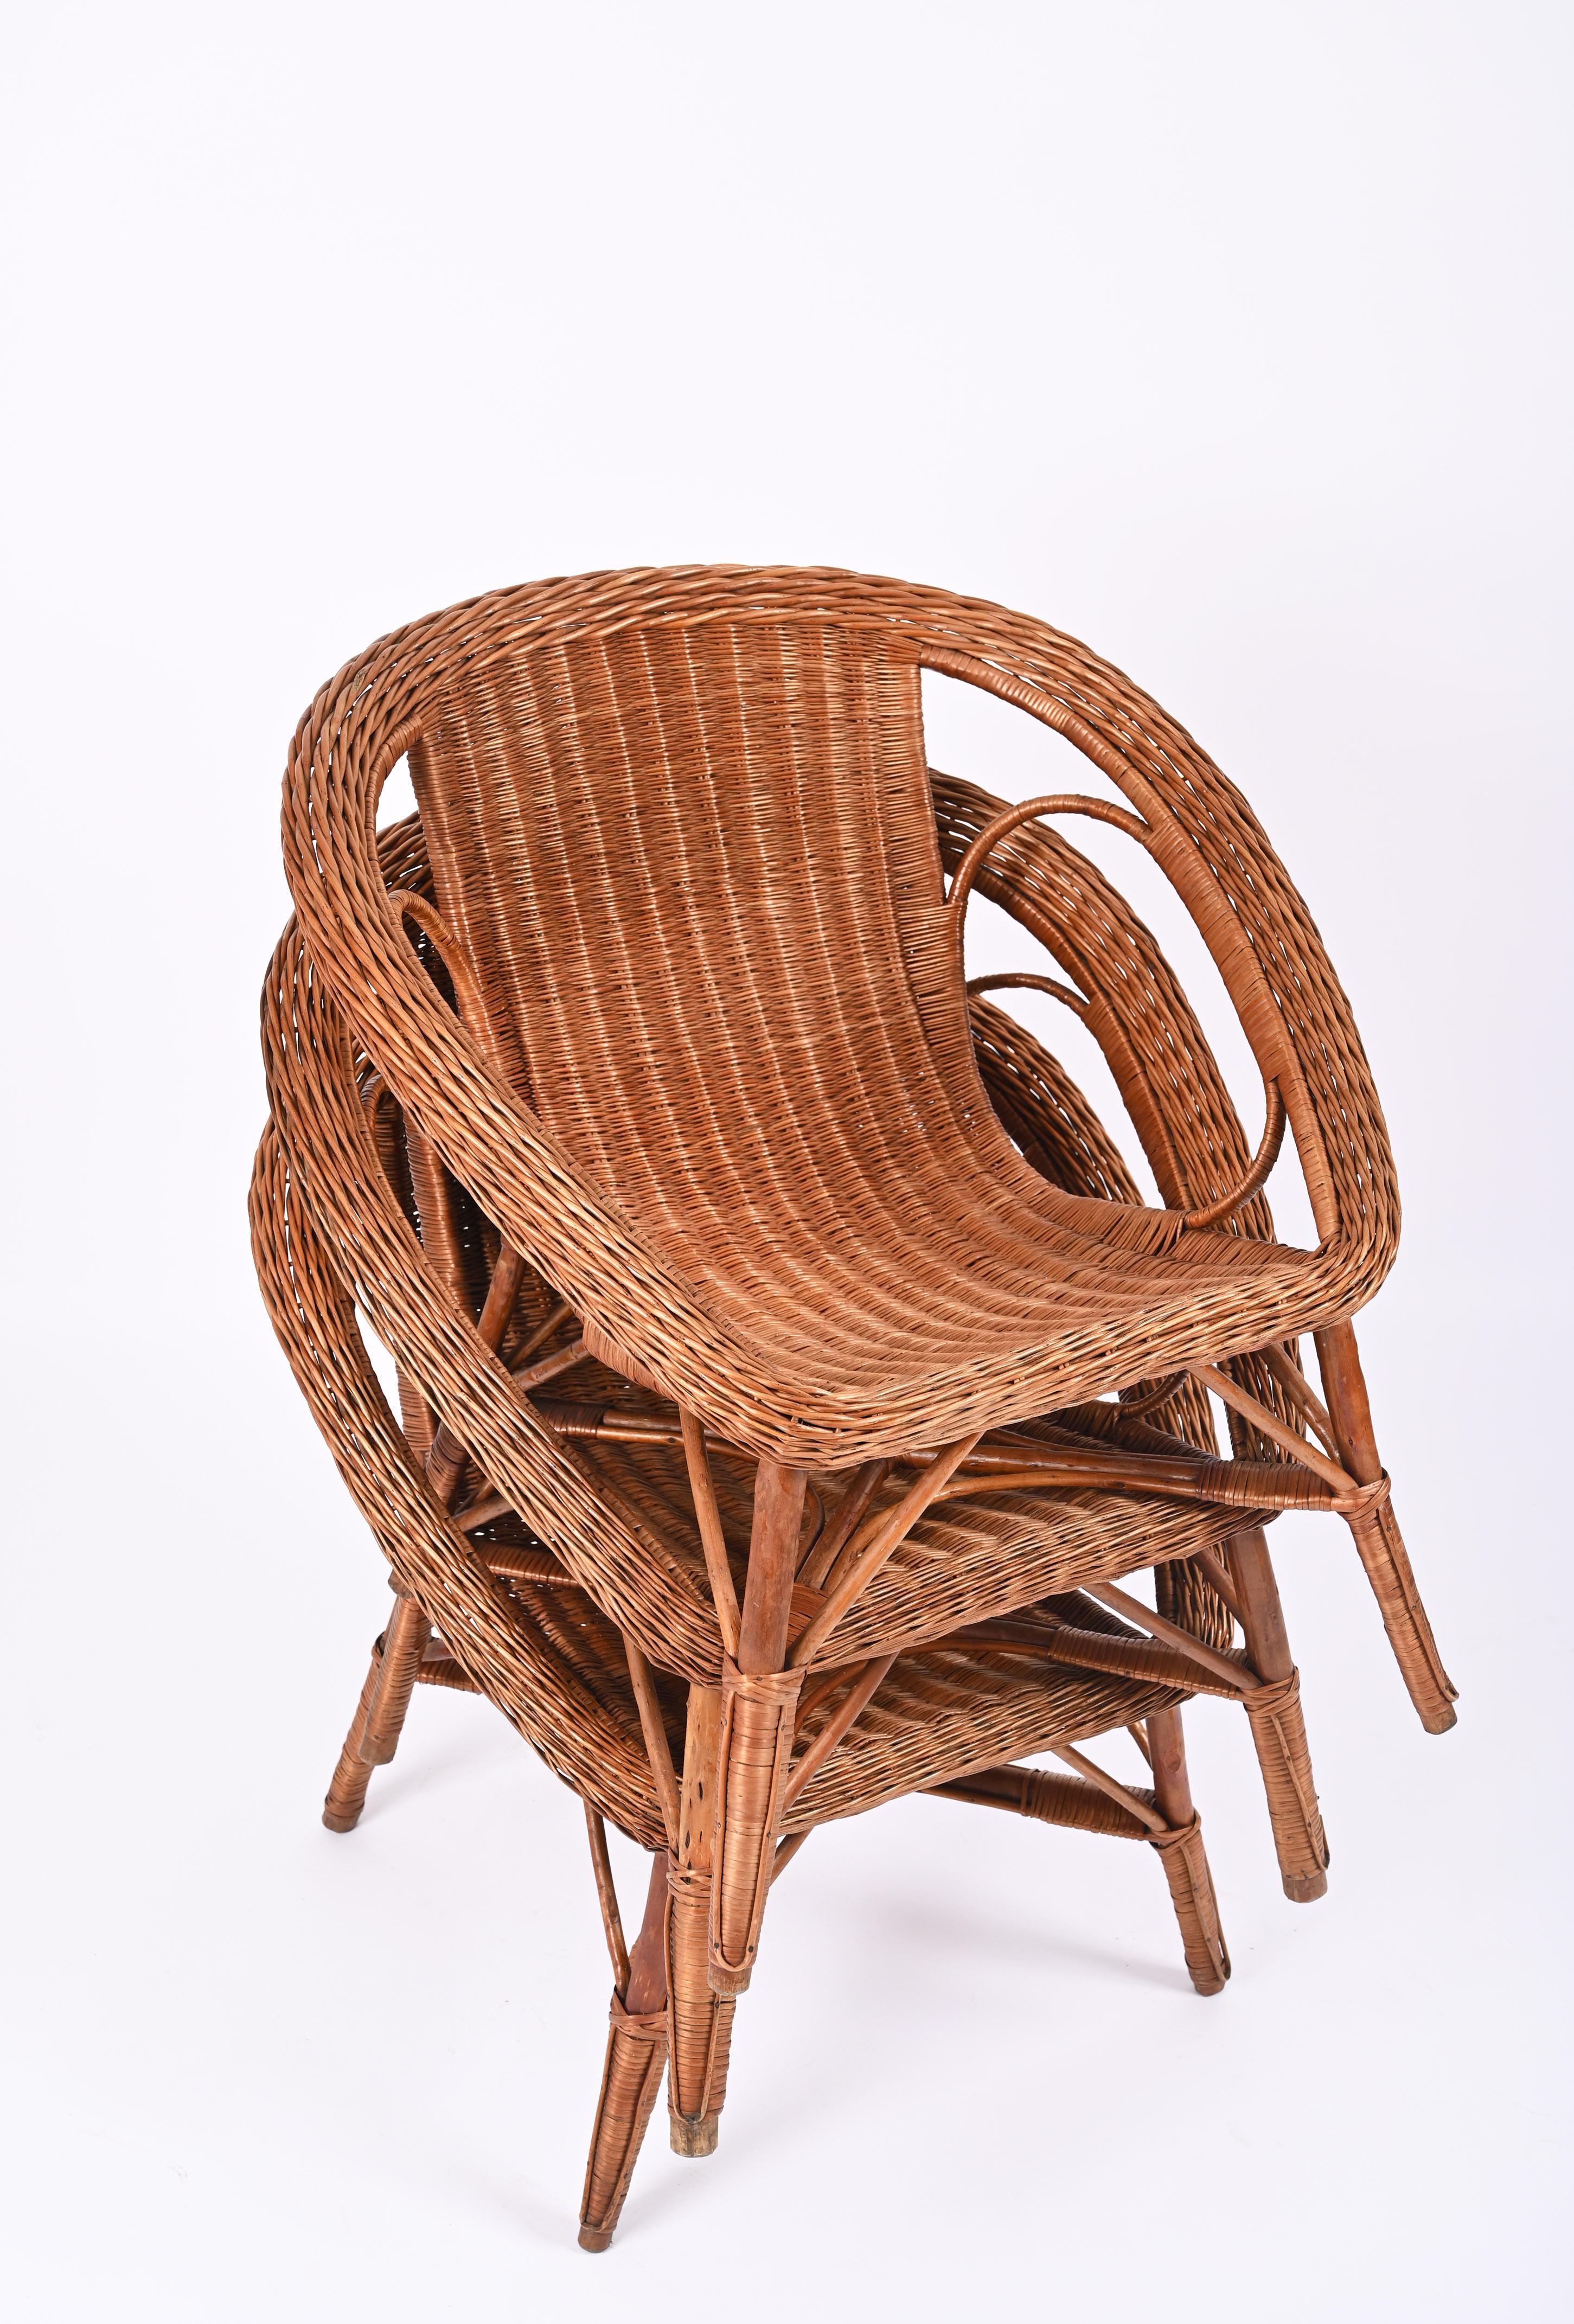 Set of Three Wicker and Wood Armchairs and Table, Italy 1960s For Sale 12